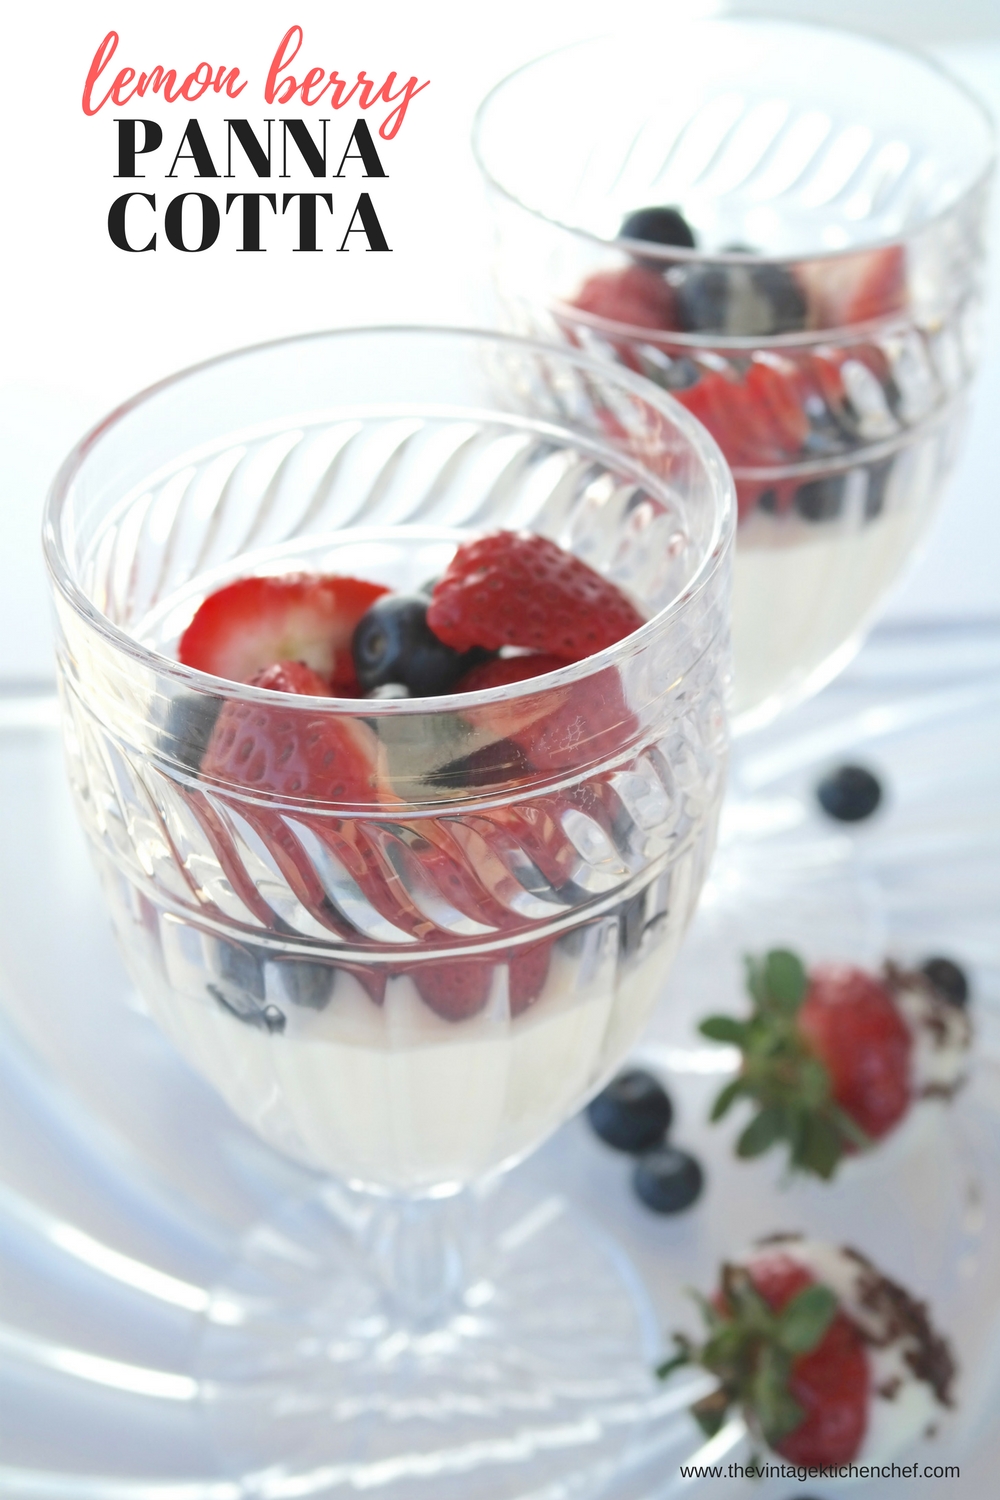 Lemon Berry Panna Cotta is an elegant dessert that is so simple to make. It's rich, smooth and creamy and will certainly be a crowd pleaser.